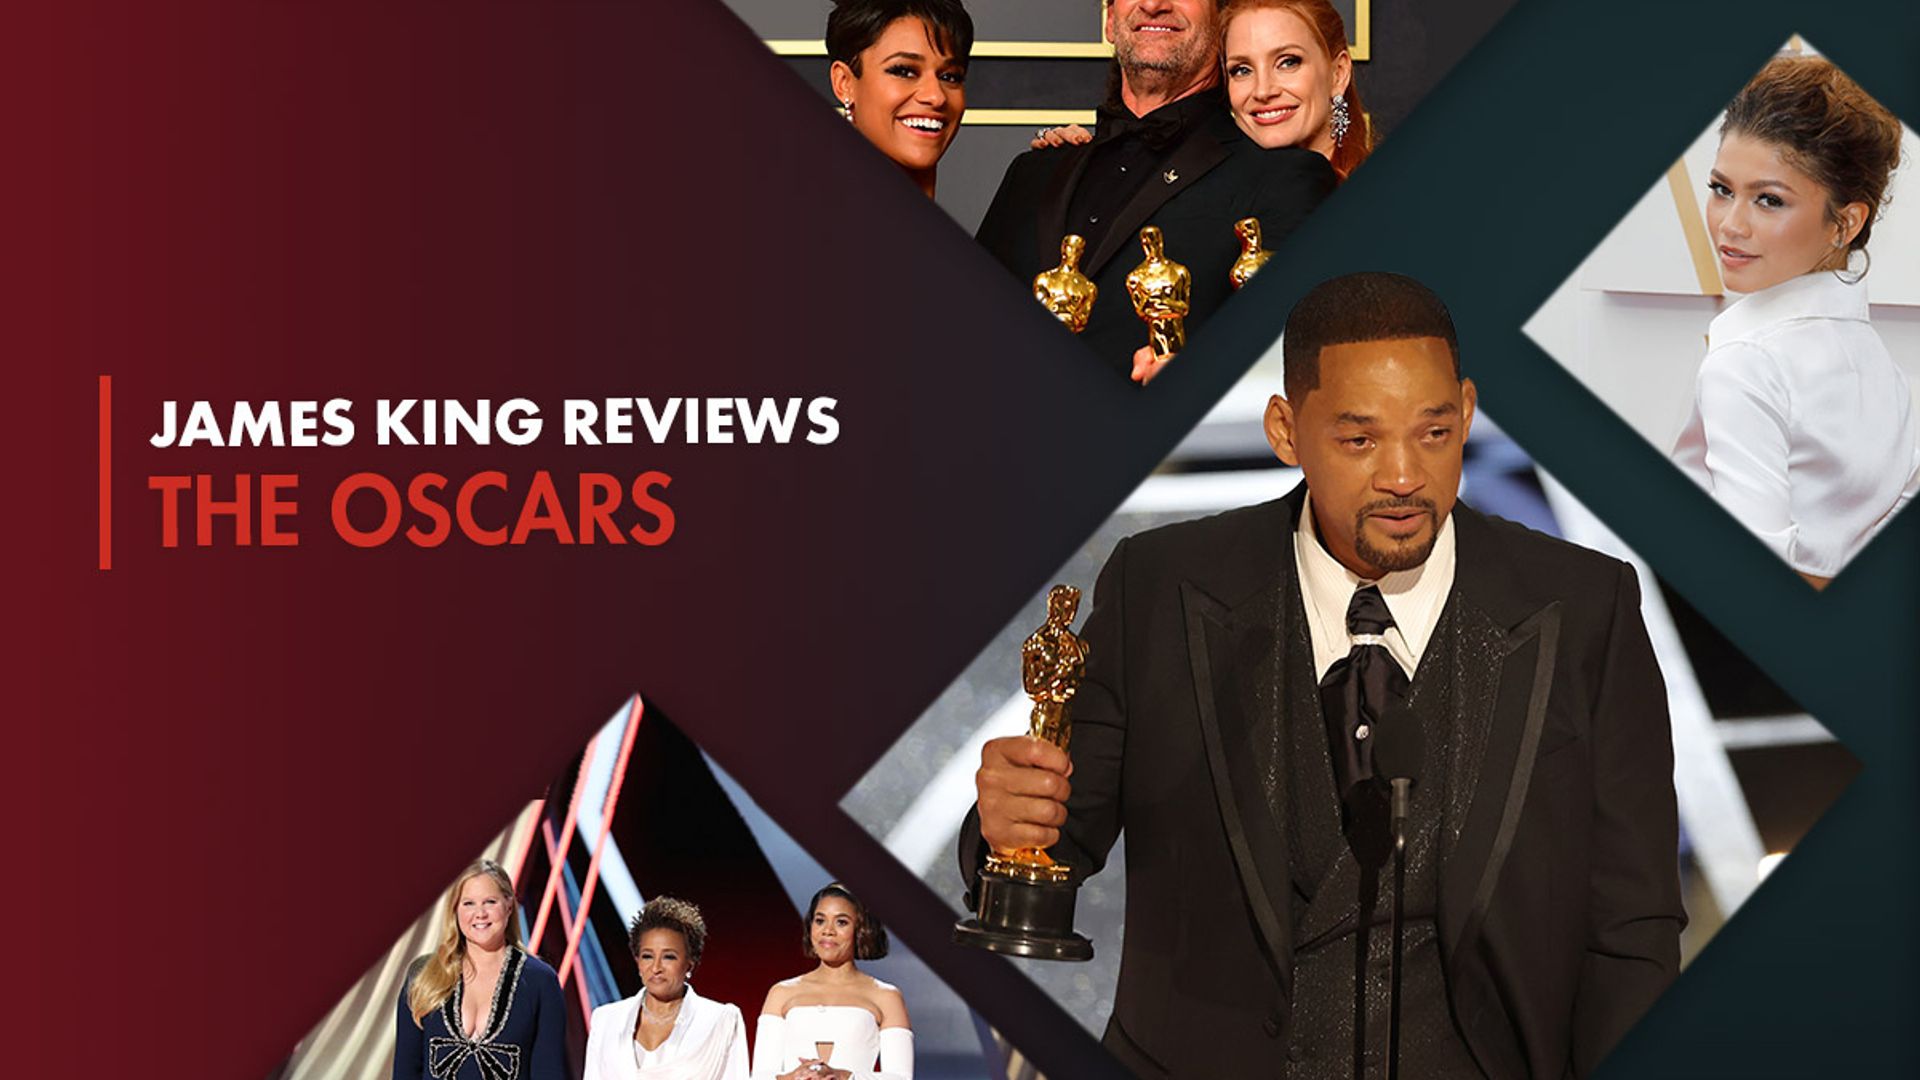 James King reviews the Oscars 2022: a historic night for many different reasons